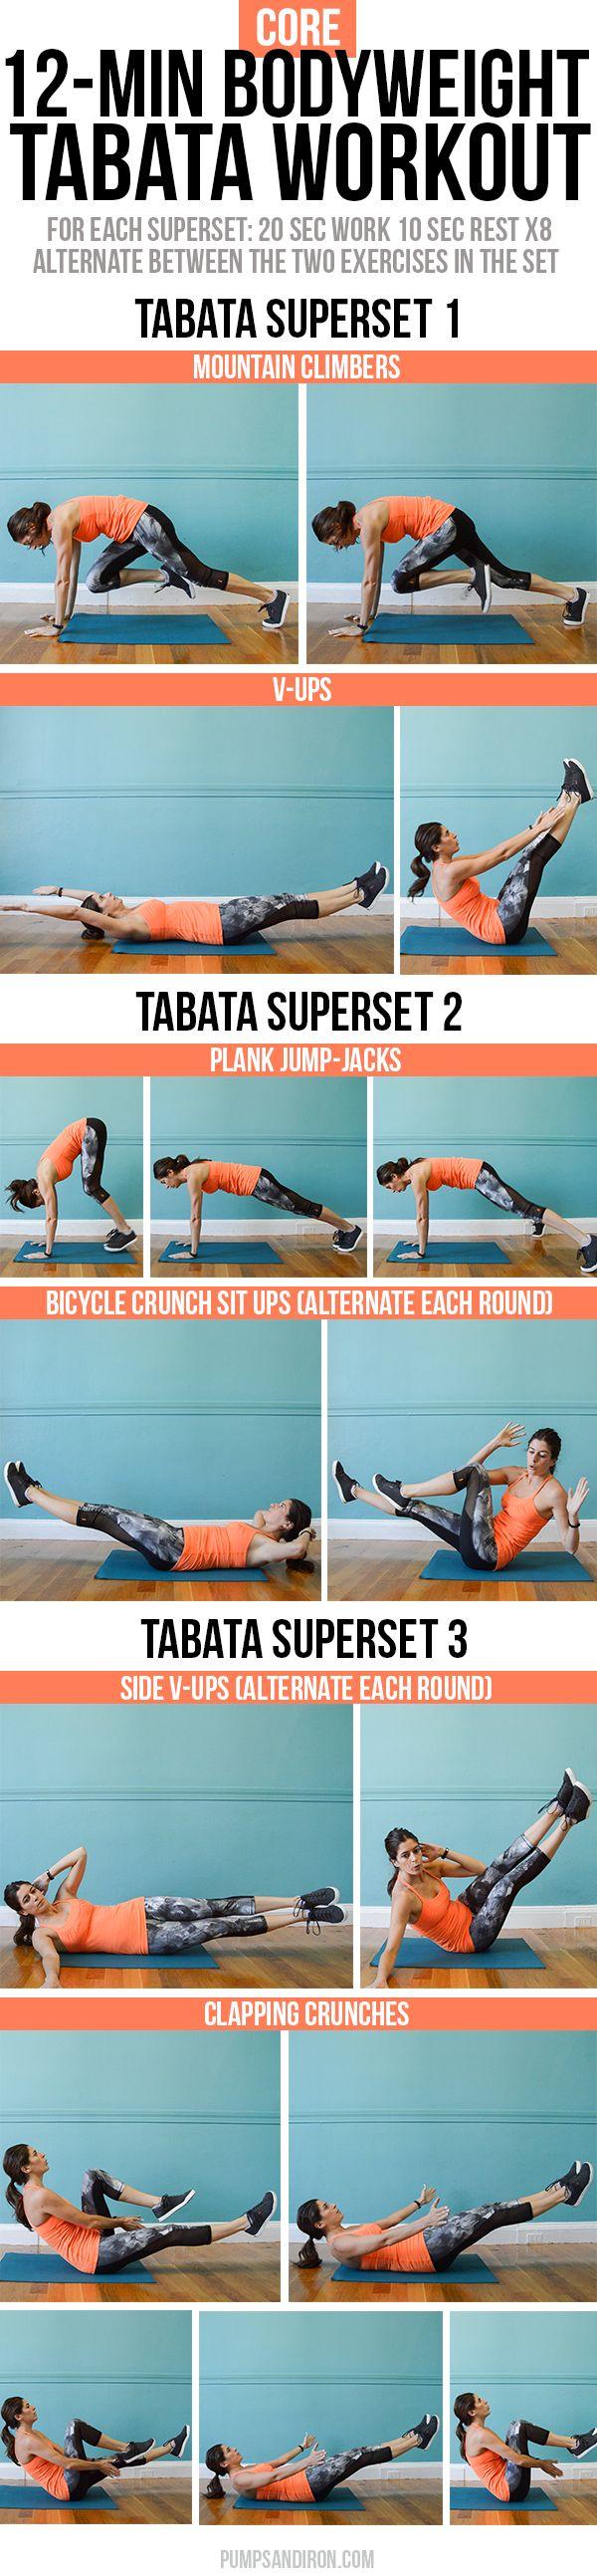 Свадьба - 12-Minute Bodyweight Tabata Workout Series: Core